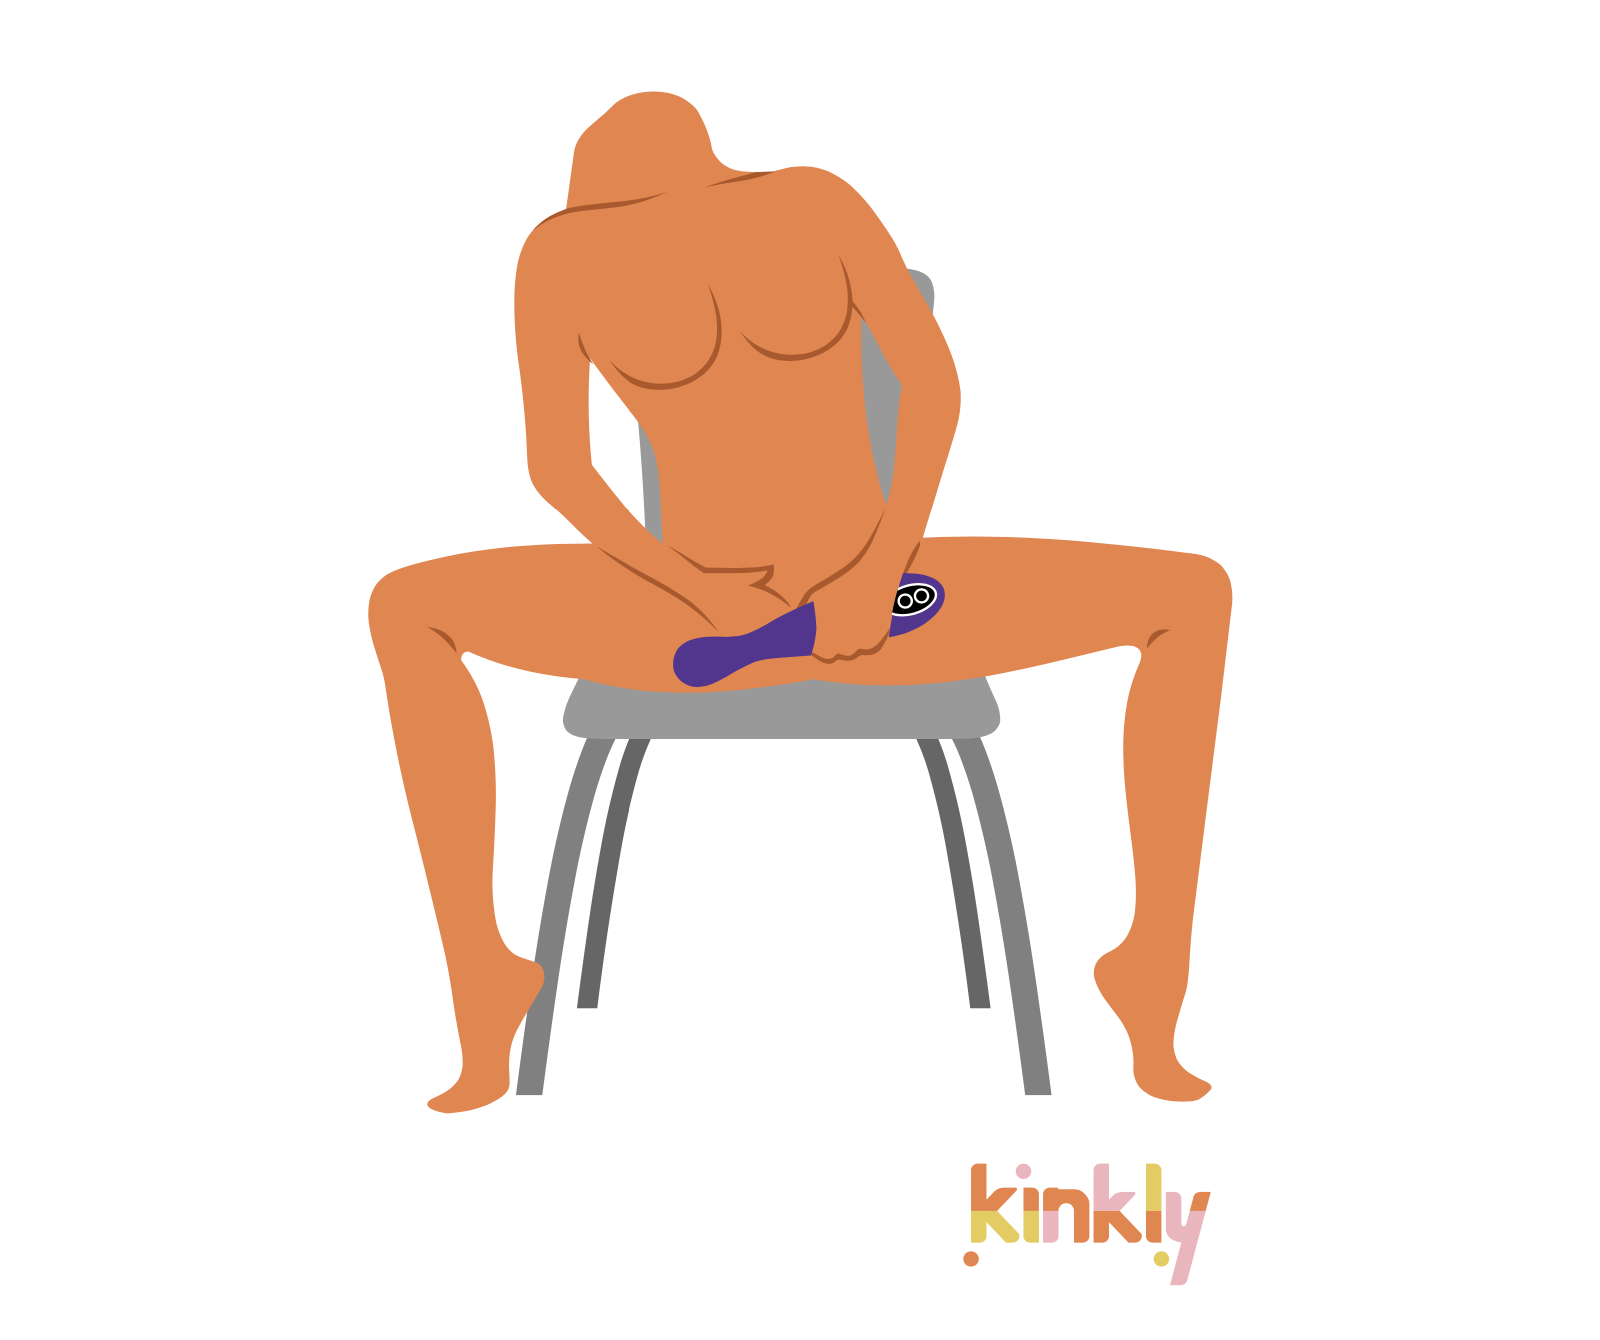 Illustrated sex position for the Your Royal Highness position. A person sits on a chair. Their legs are very widely spread, and they're holding a purple vibrator in their hand.